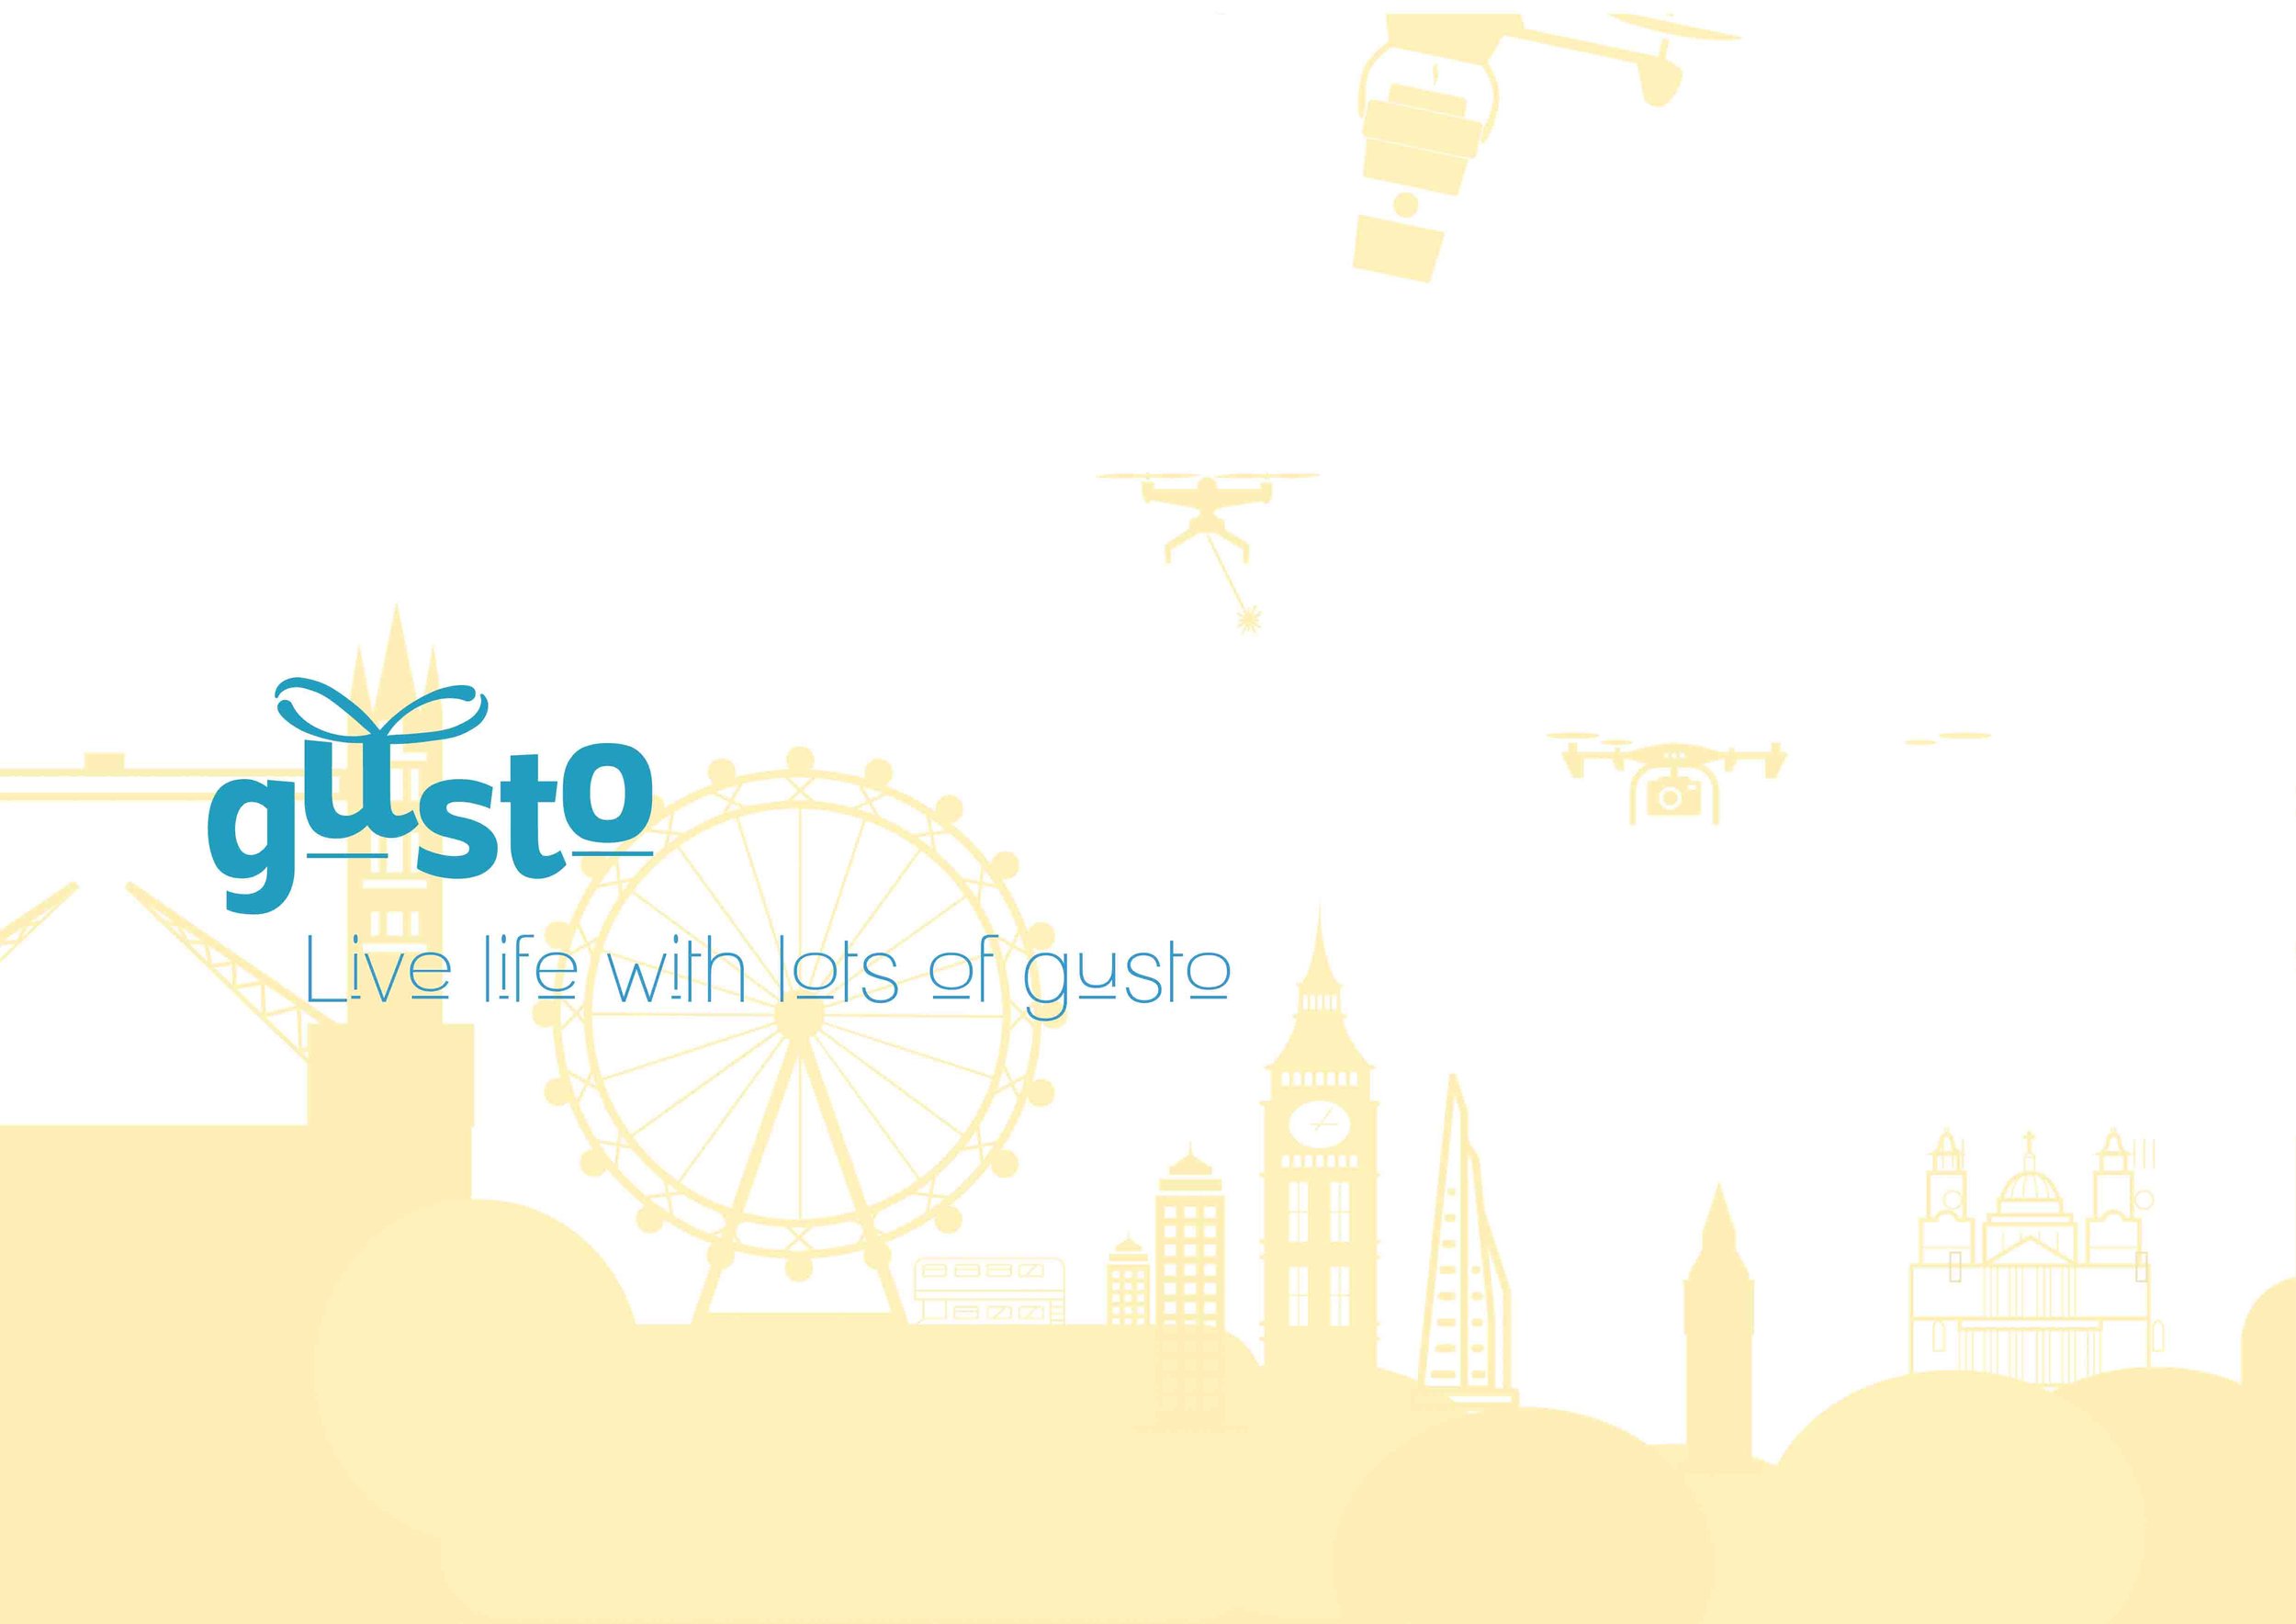 Gusto front cover.jpg